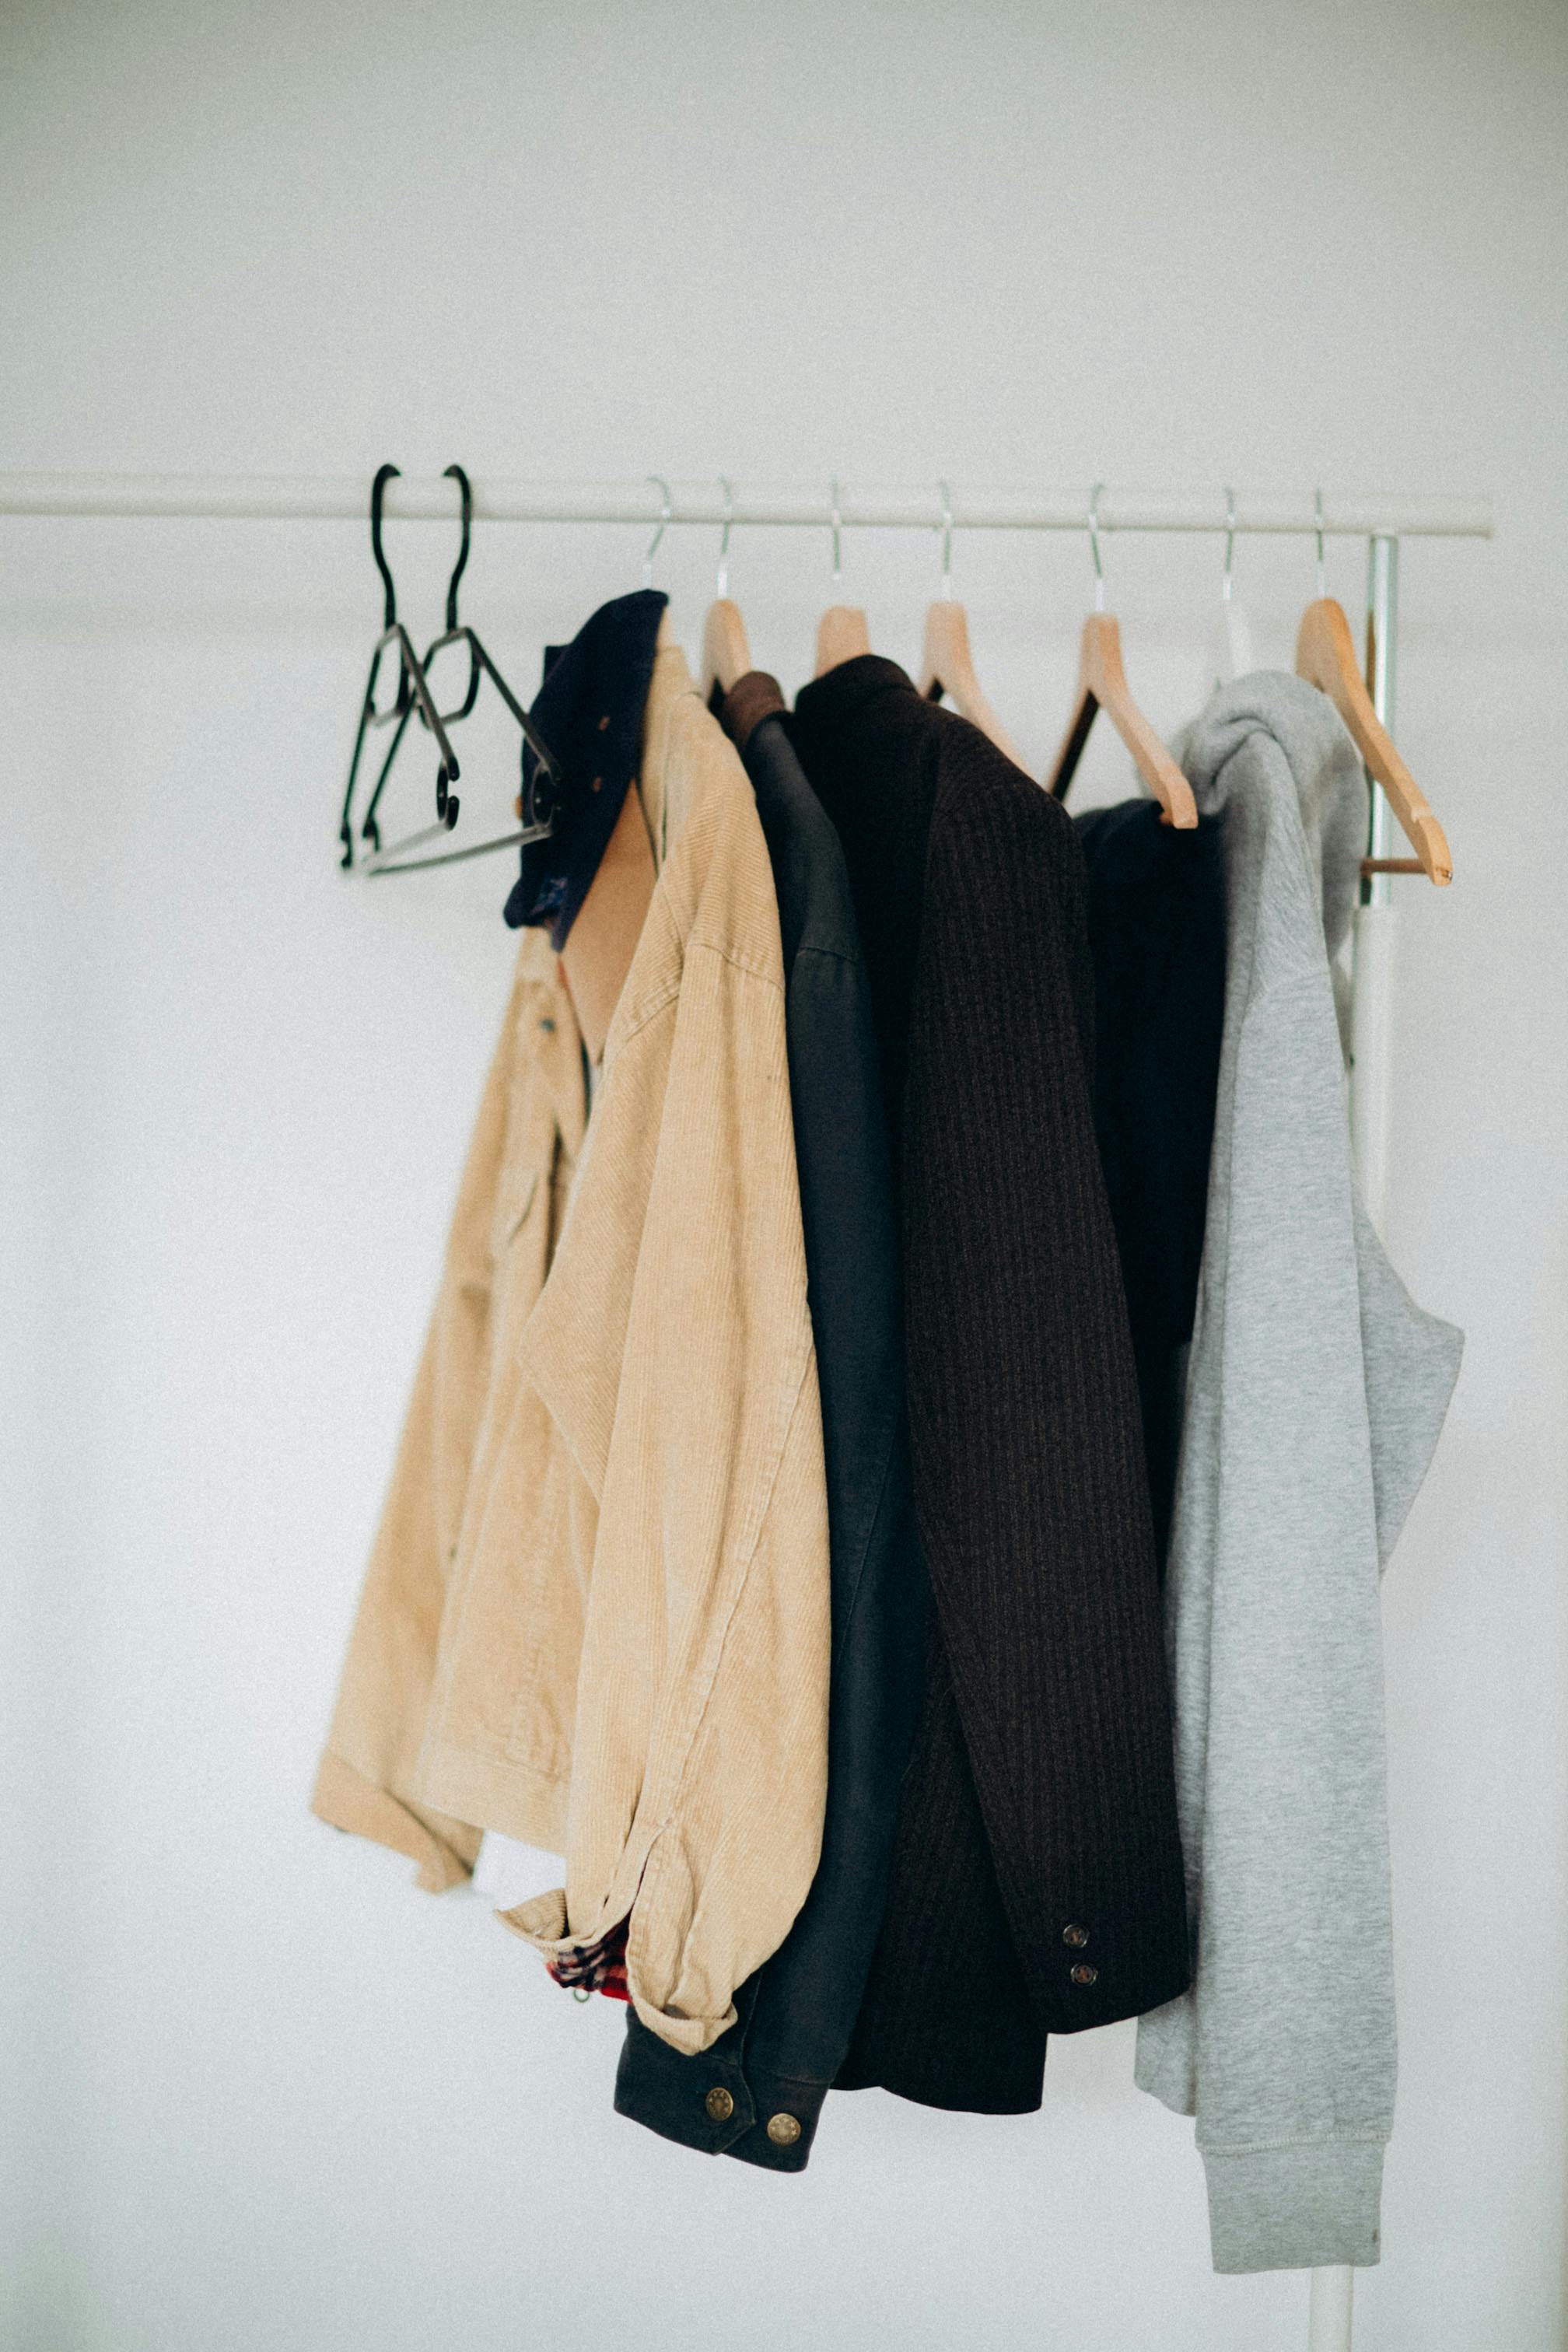 Clothes on Hangers Hanging on Patio · Free Stock Photo